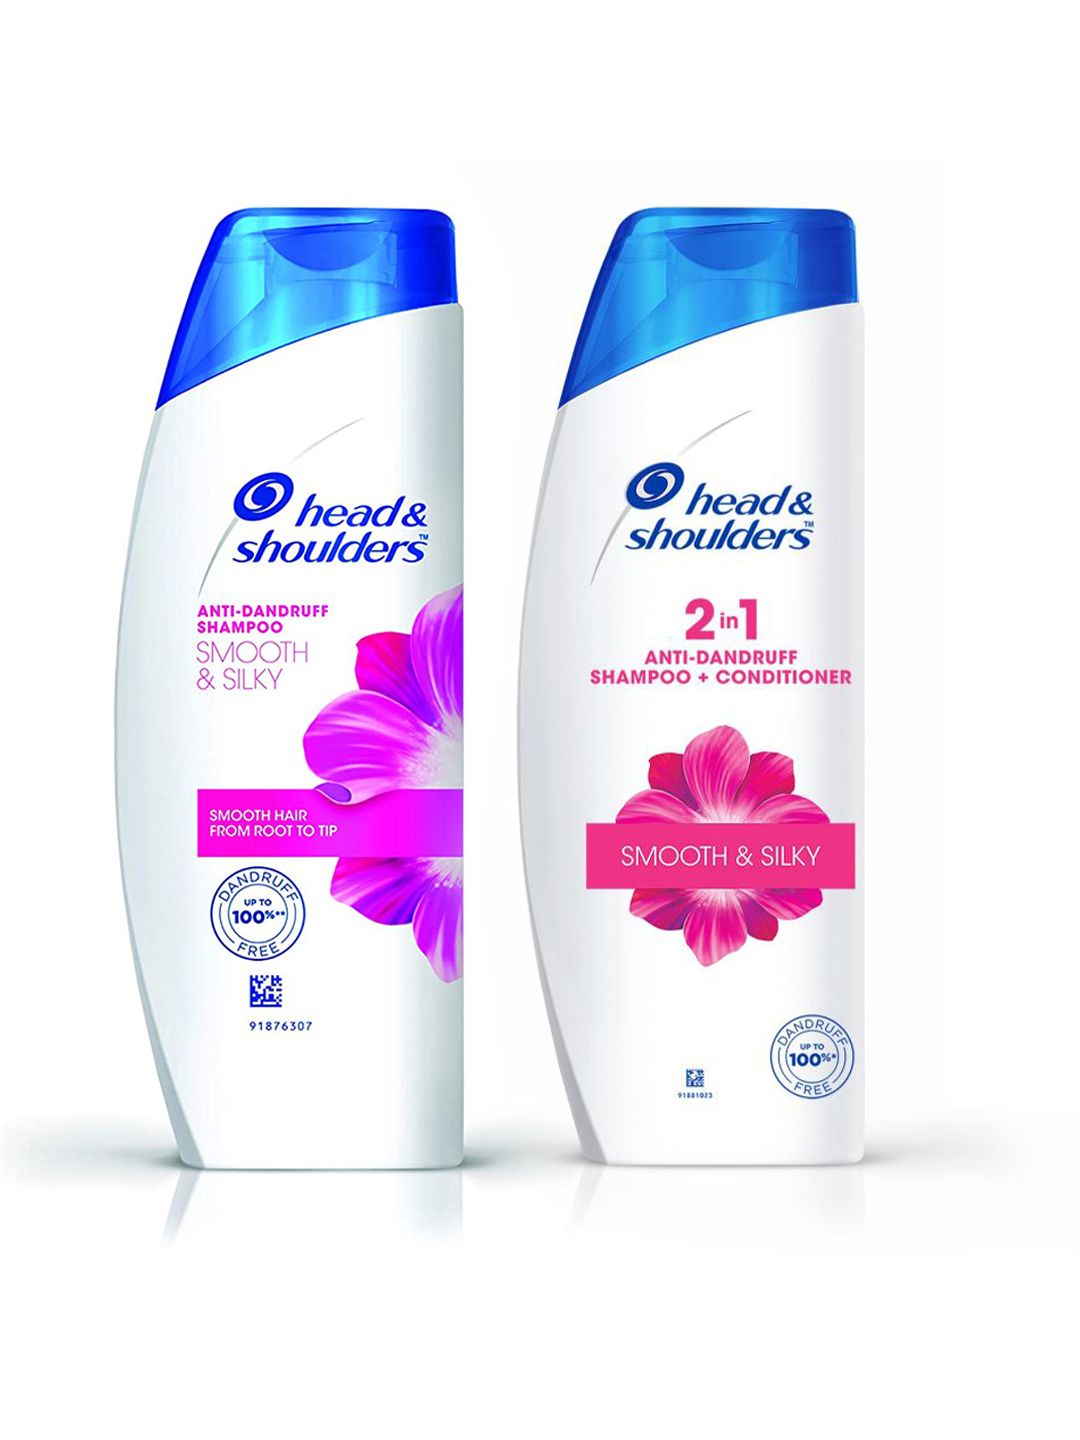 Head & Shoulders Set of Shampoo & 2 in 1 Shampoo + Conditioner Price in India